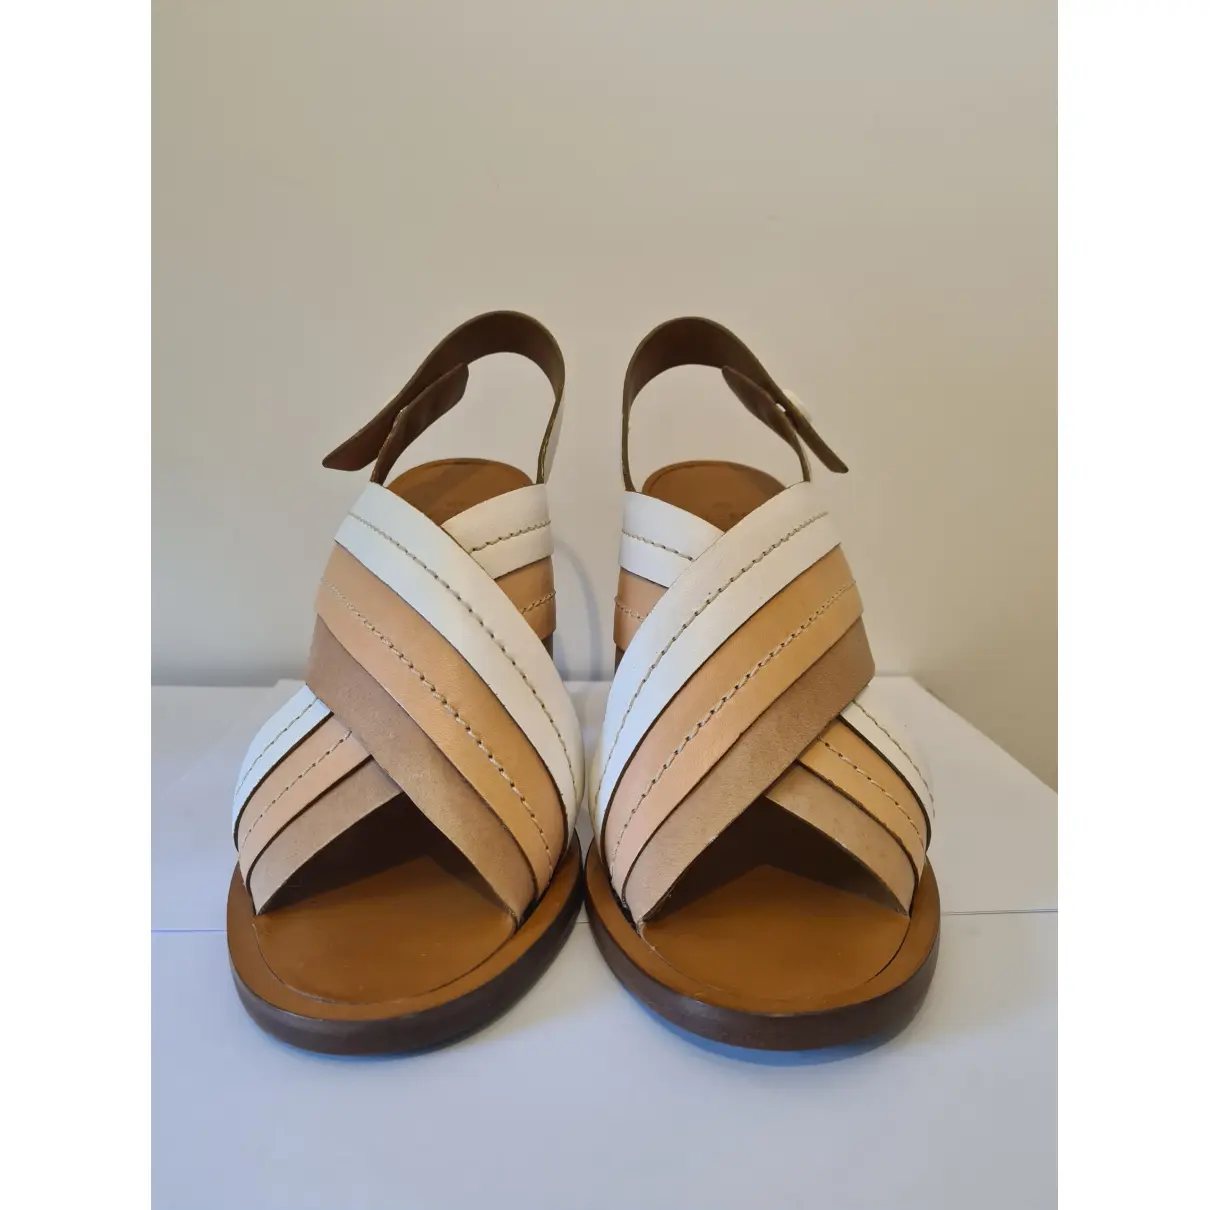 Buy Mulberry Leather sandals online